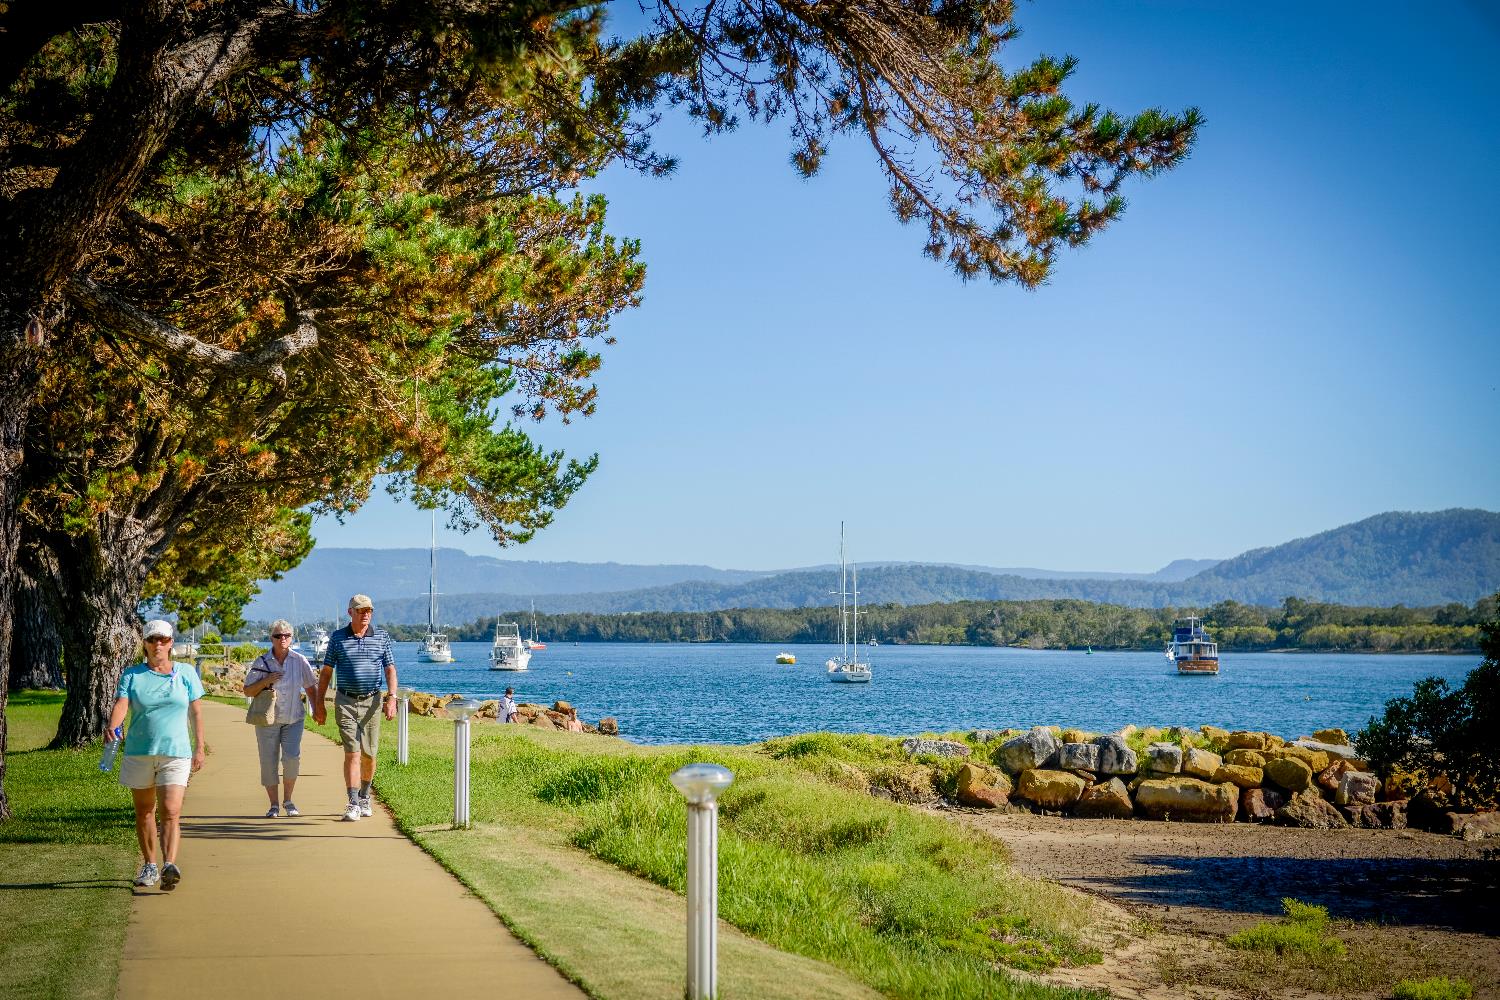 People walking along the footpath at the Foreshore Reserve, with a view of the water in the background.